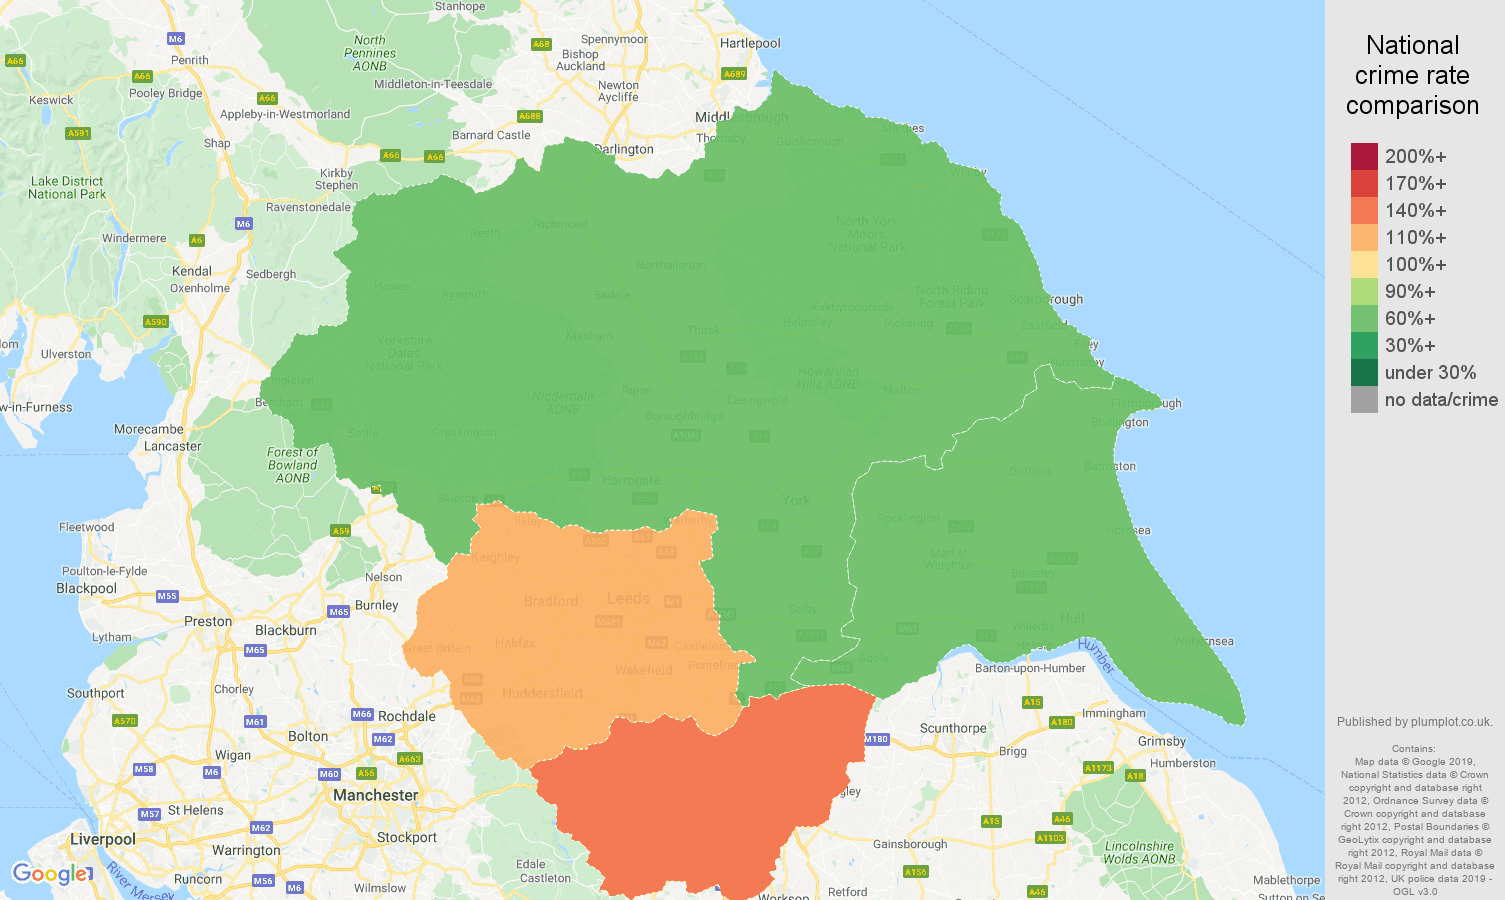 Yorkshire possession of weapons crime rate comparison map